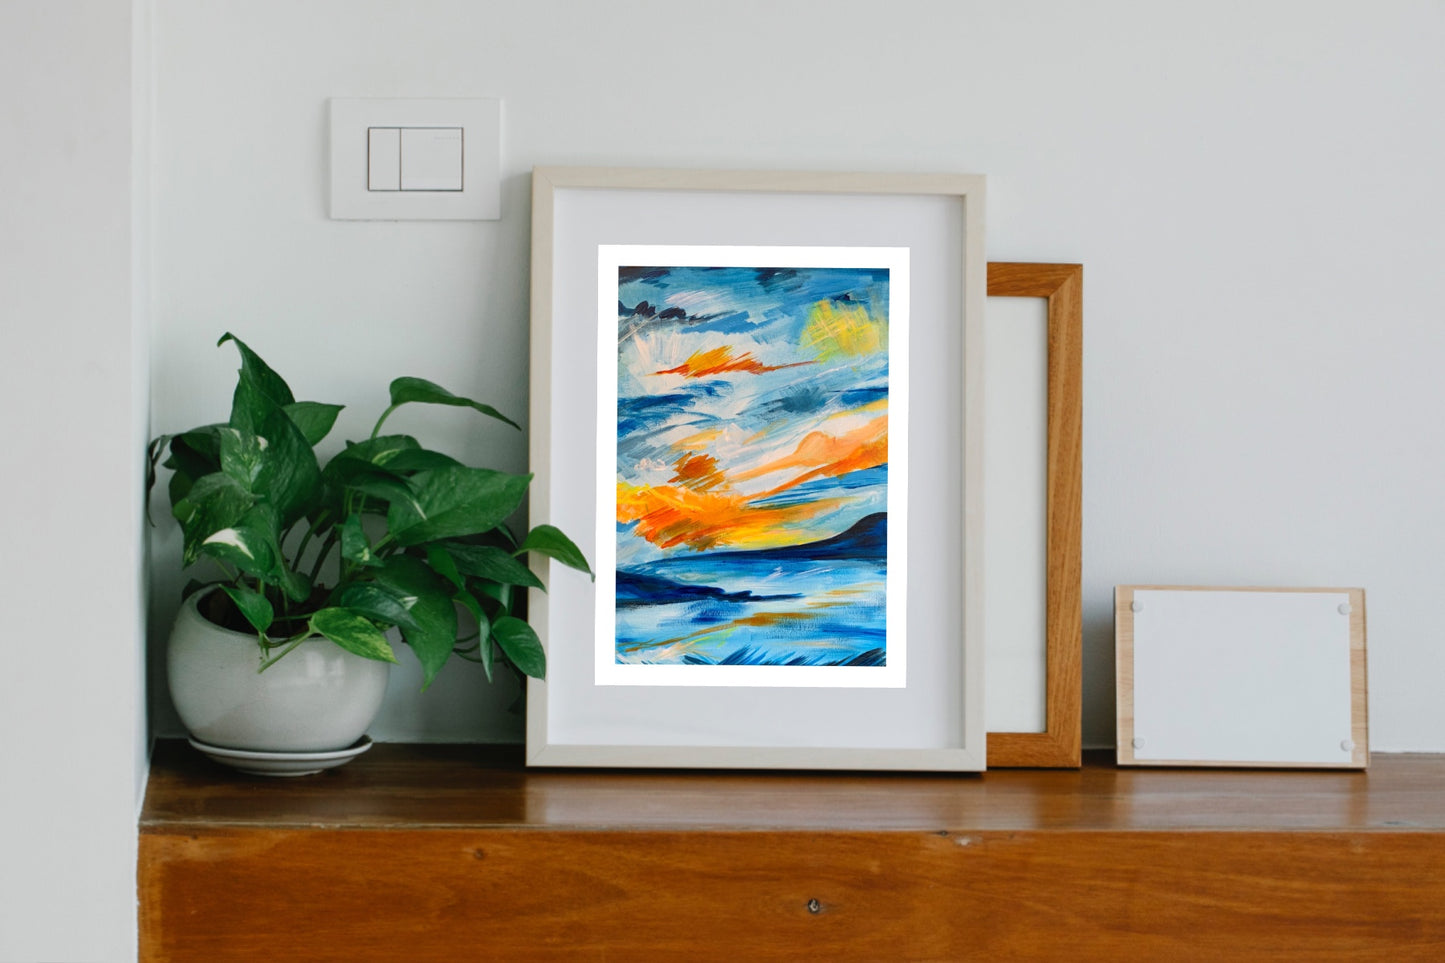 Blue Abstracted Skyscape 2 - Art Print